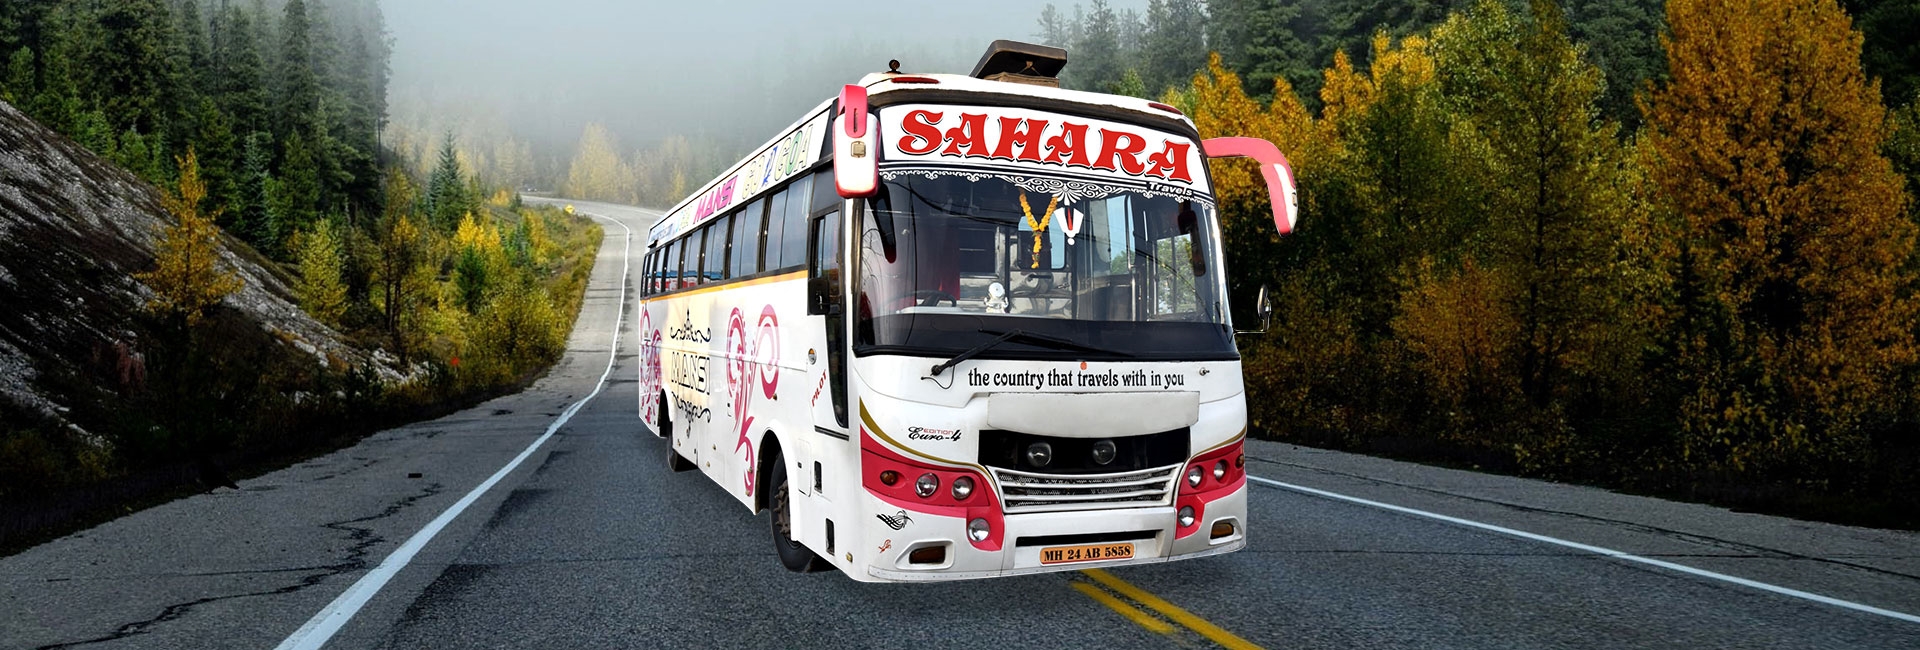 Online Bus Ticket Booking Sahara Tours And Travels